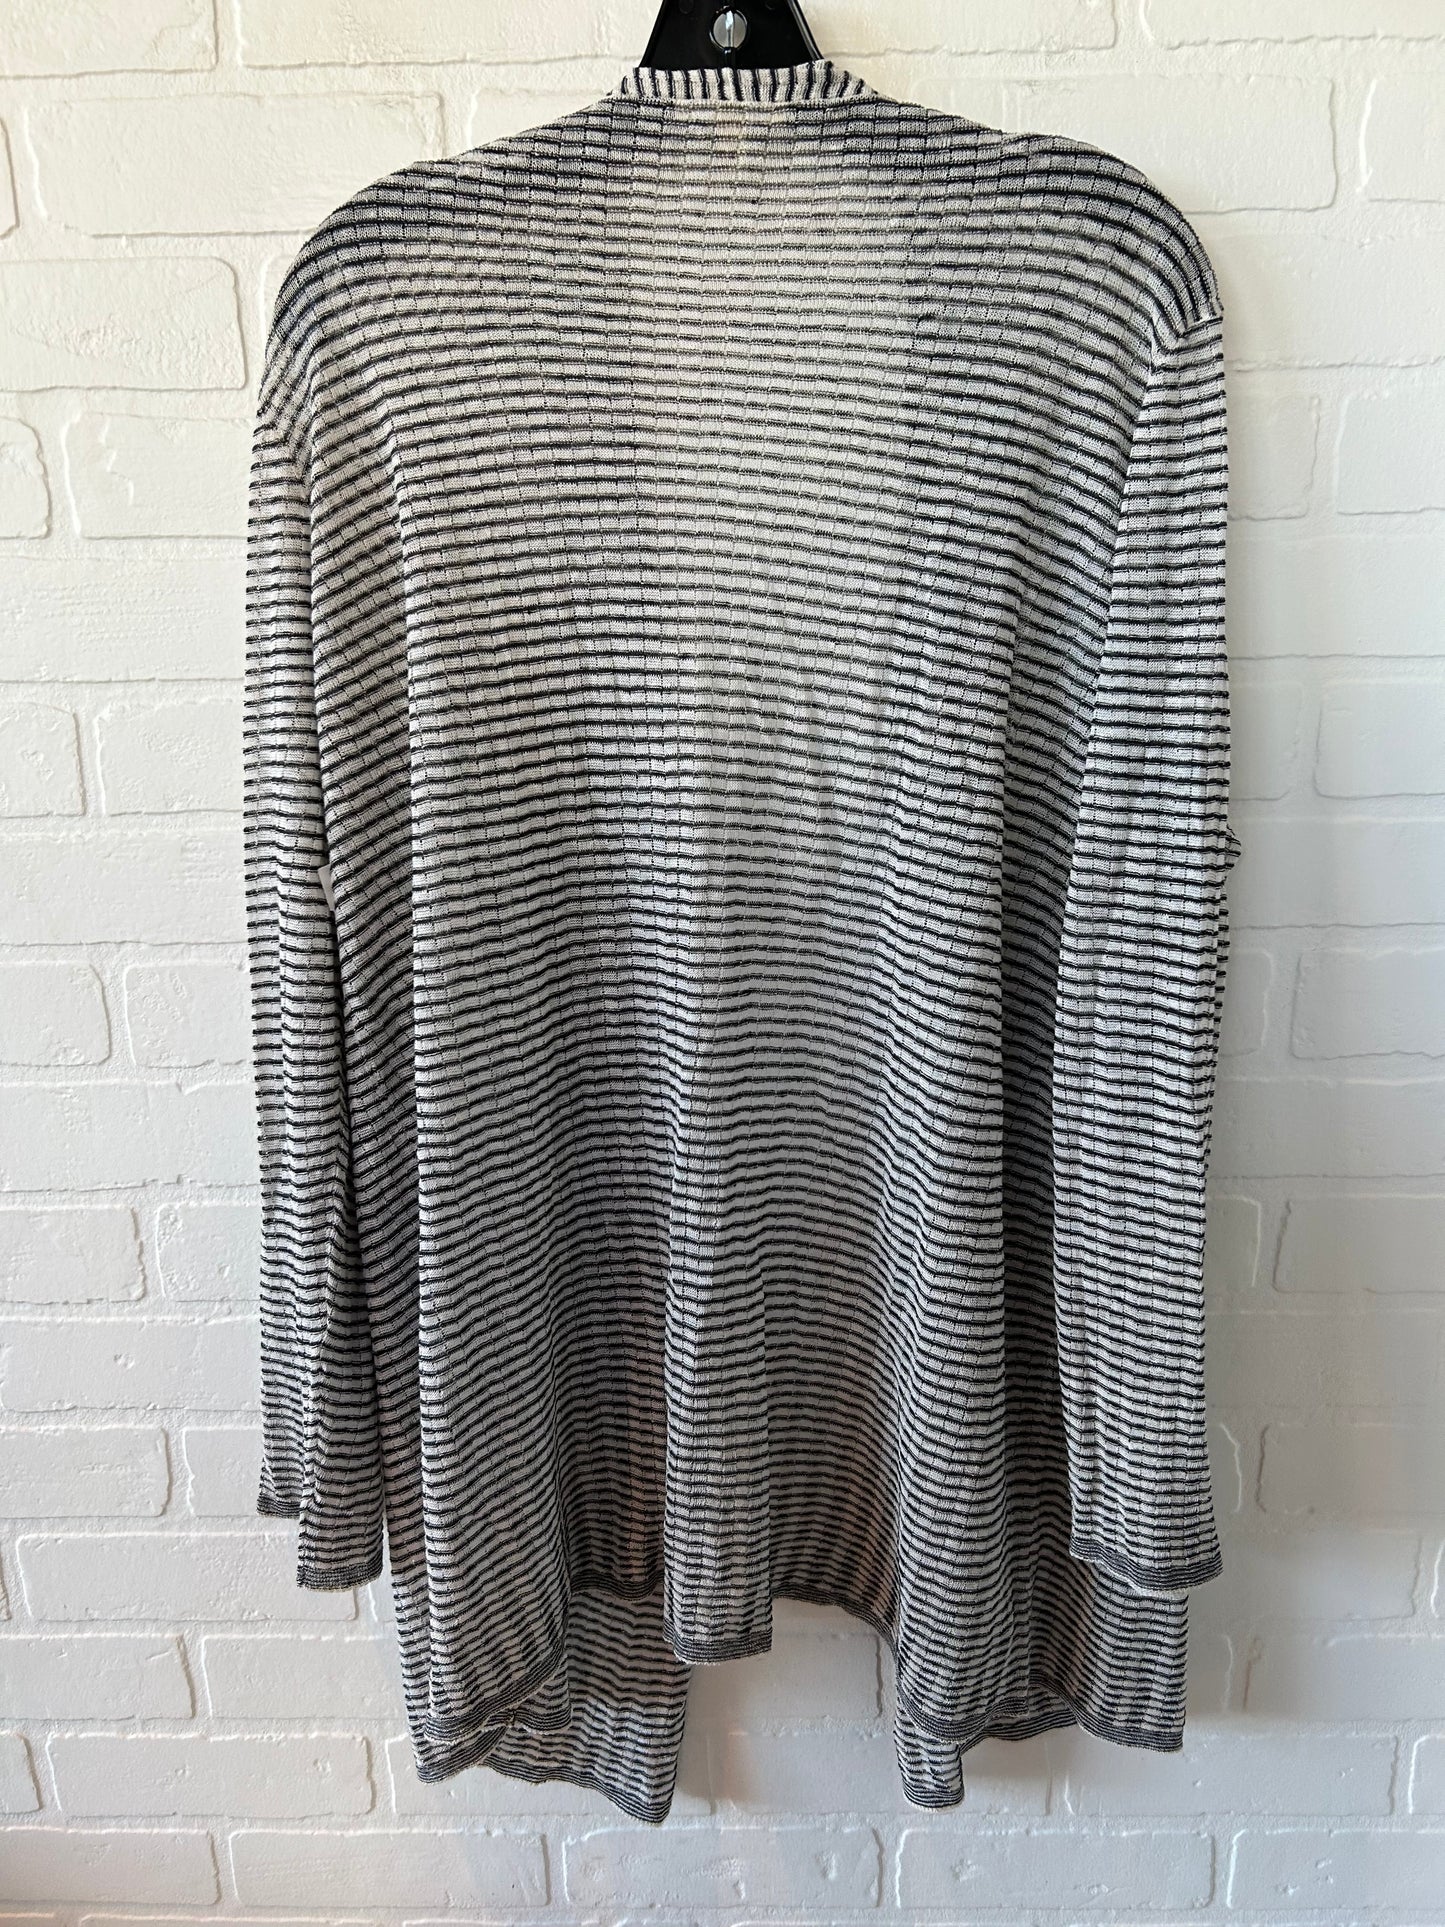 Sweater Cardigan By Eileen Fisher  Size: Xl